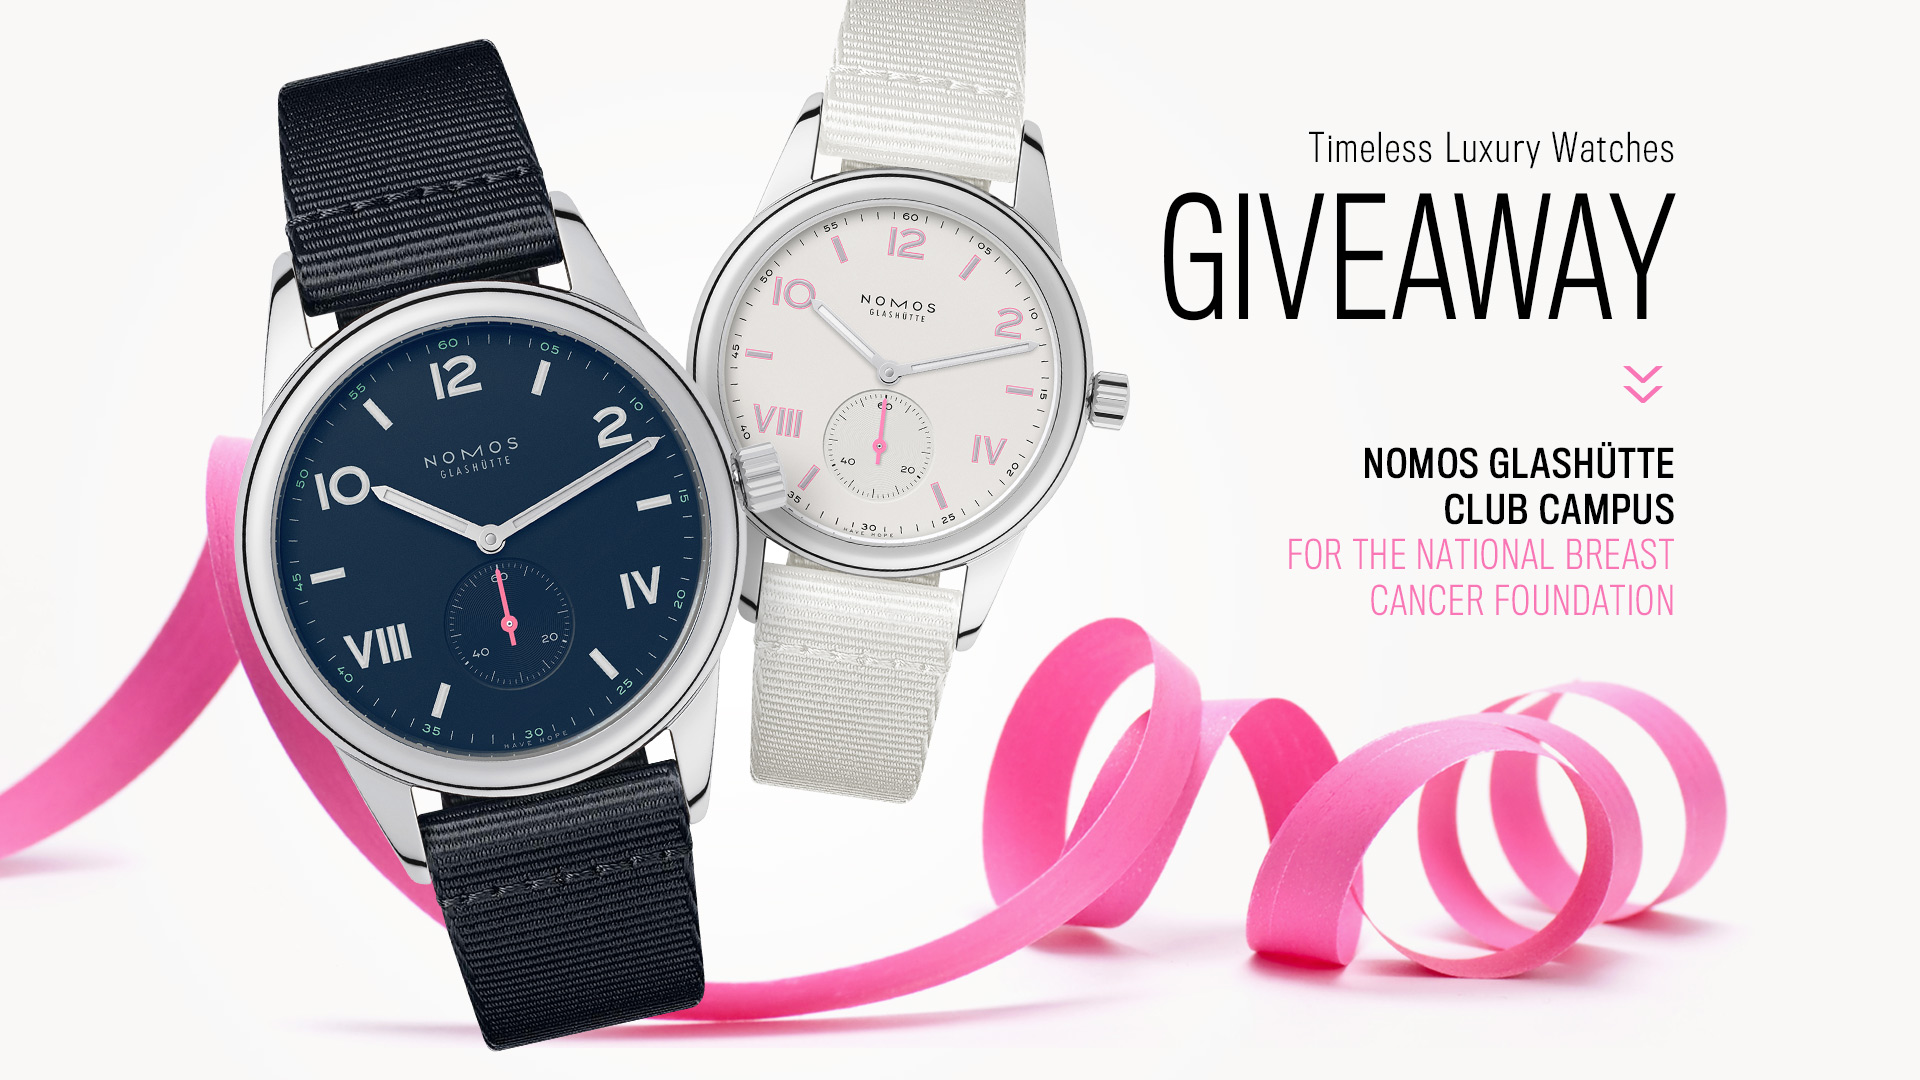 LAST CHANCE: Timeless Luxury Watches NBCF Nomos Club Campus His & Hers Pair